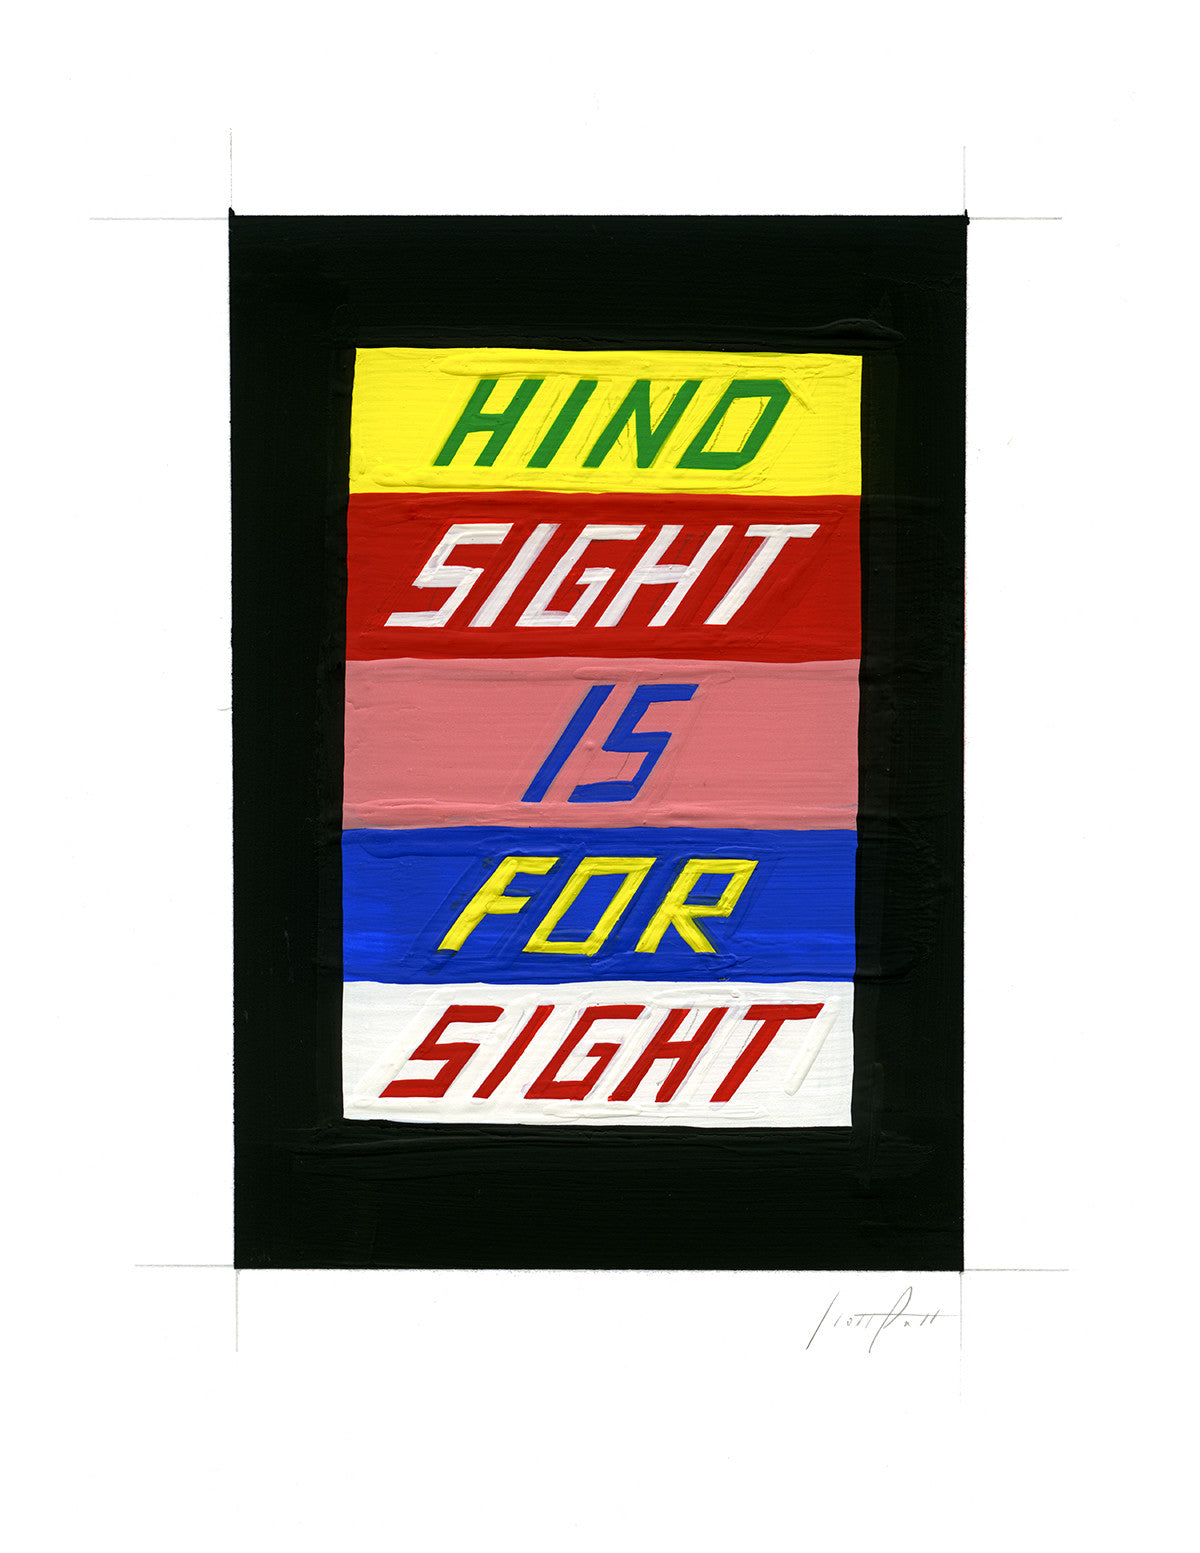 #271 HIND SIGHT IS FOR SIGHT